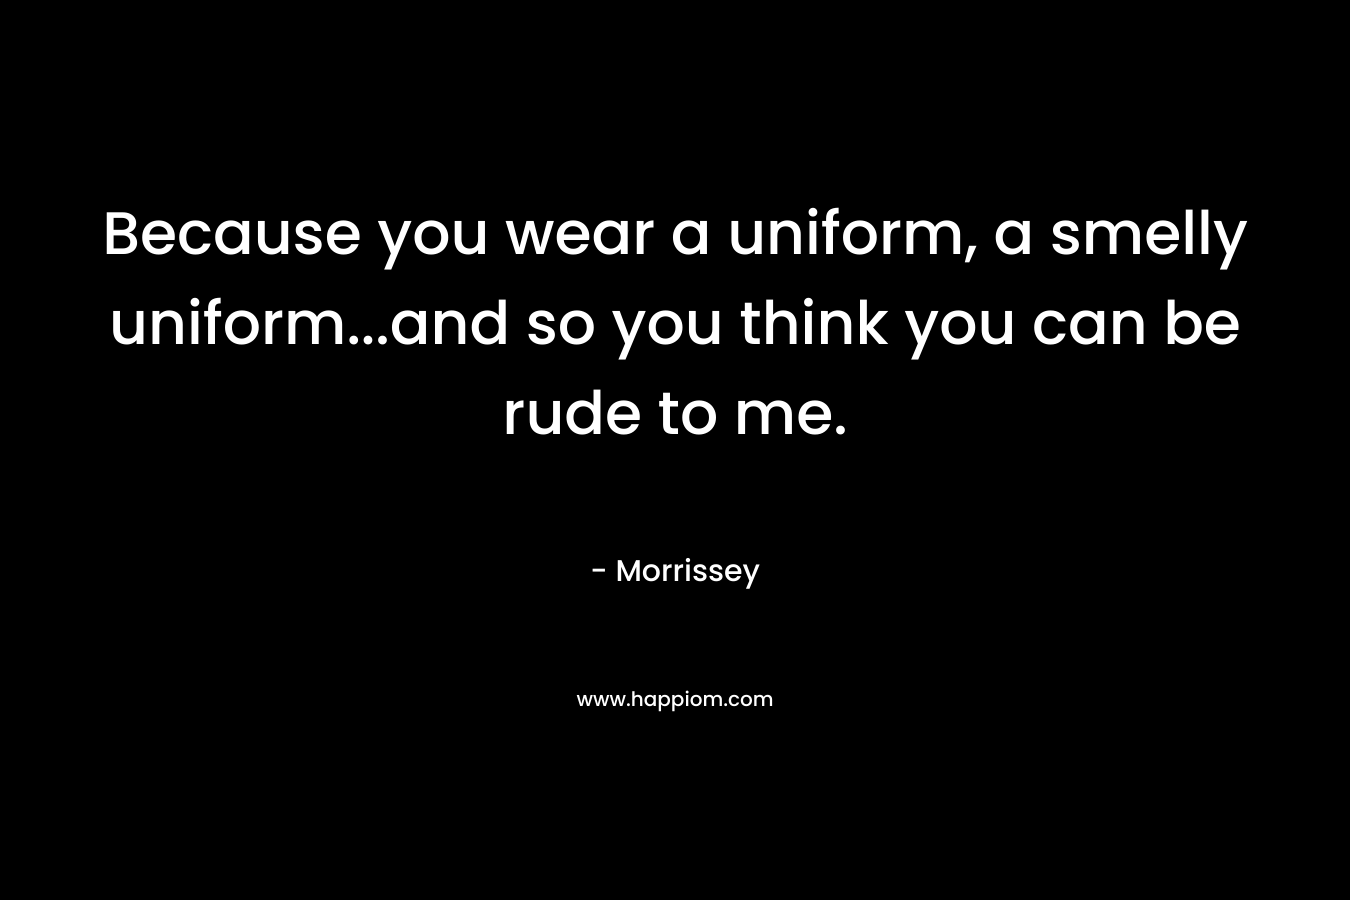 Because you wear a uniform, a smelly uniform…and so you think you can be rude to me. – Morrissey